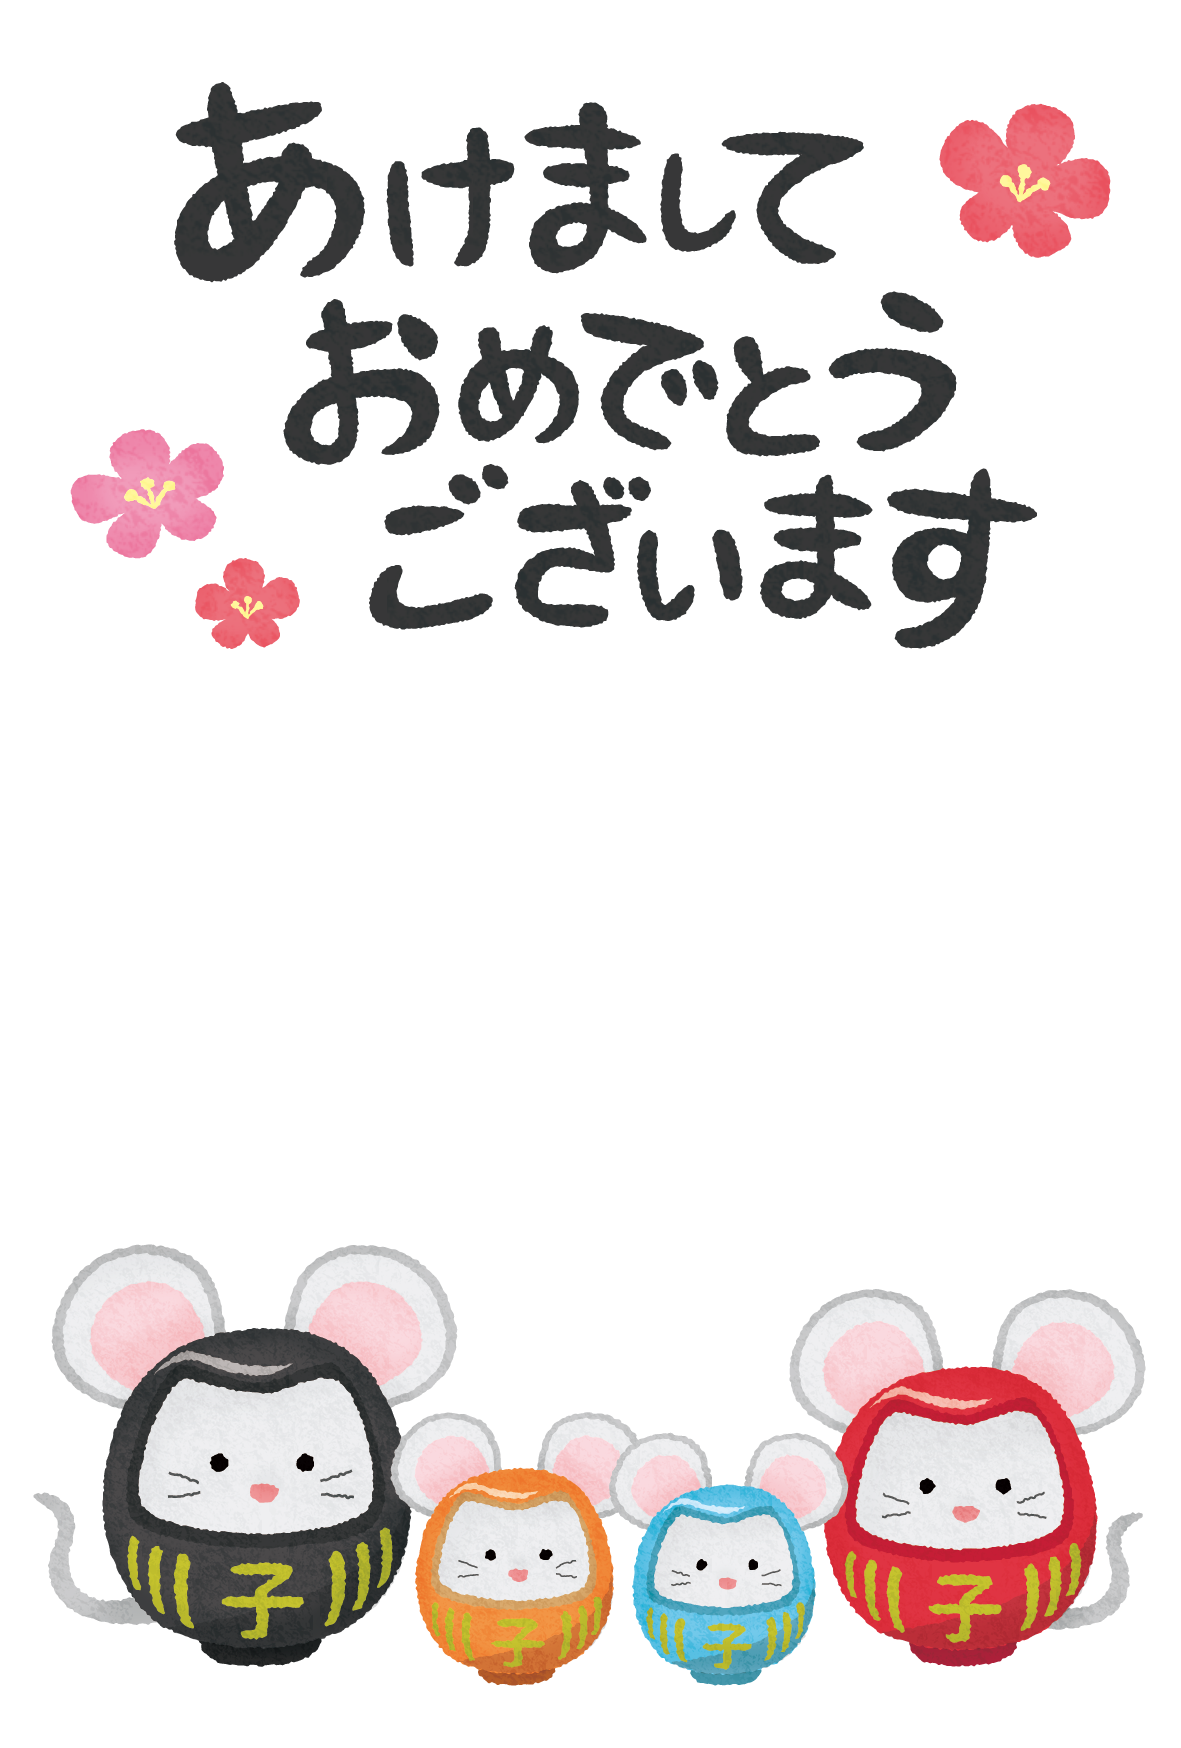 Free Clipart of New Year’s Card Free Template (Rat daruma couple and children)